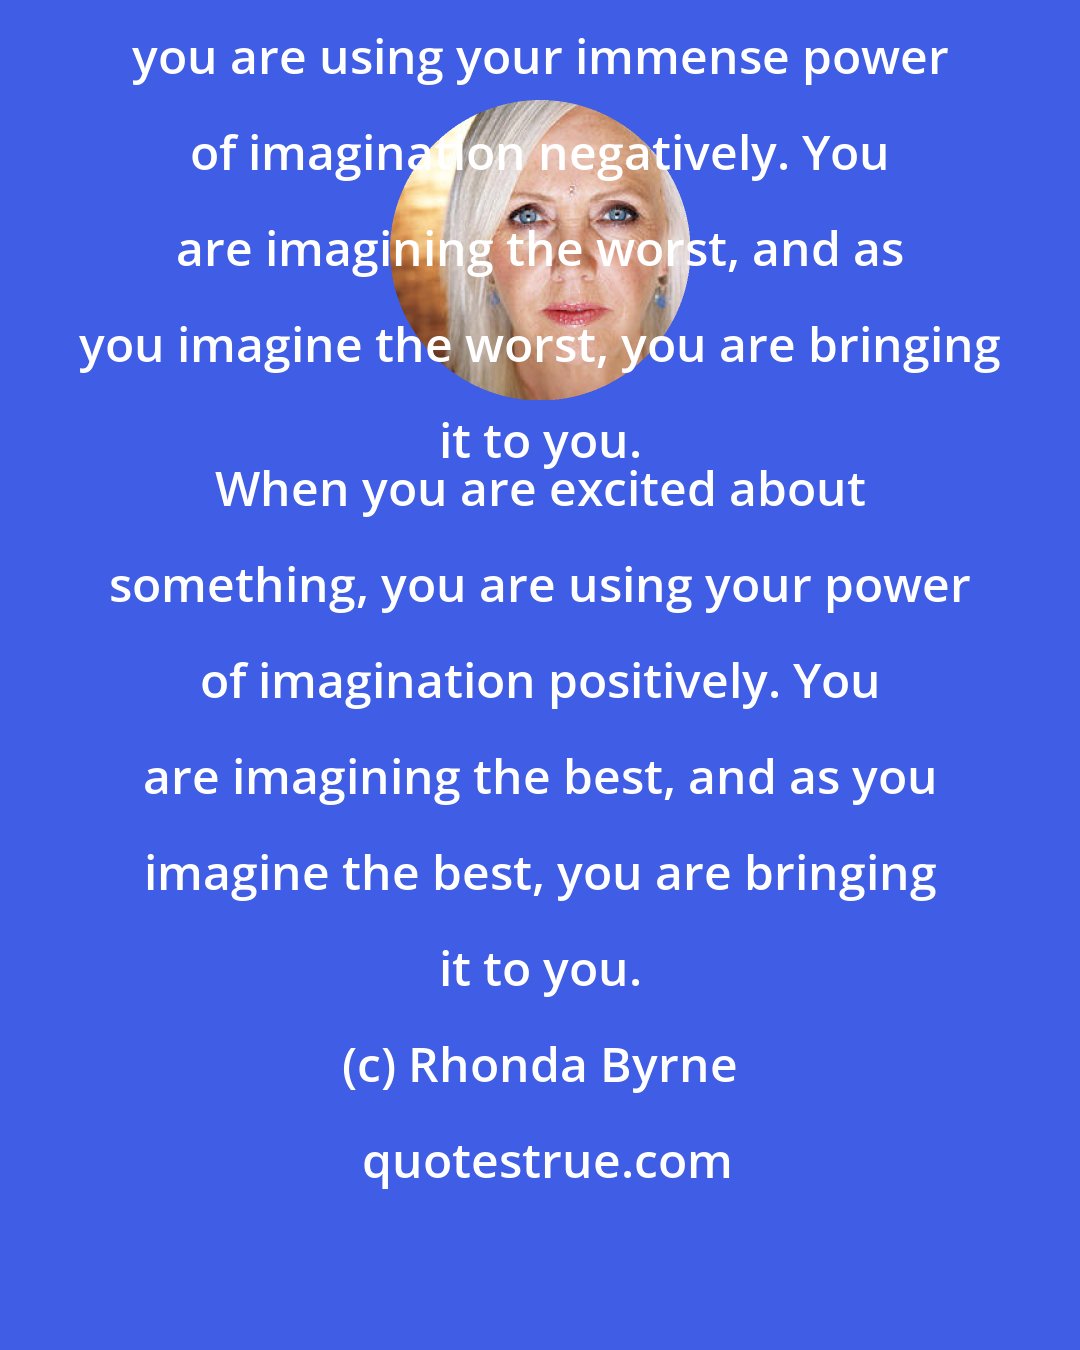 Rhonda Byrne: When you worry about something, you are using your immense power of imagination negatively. You are imagining the worst, and as you imagine the worst, you are bringing it to you. 
 When you are excited about something, you are using your power of imagination positively. You are imagining the best, and as you imagine the best, you are bringing it to you.